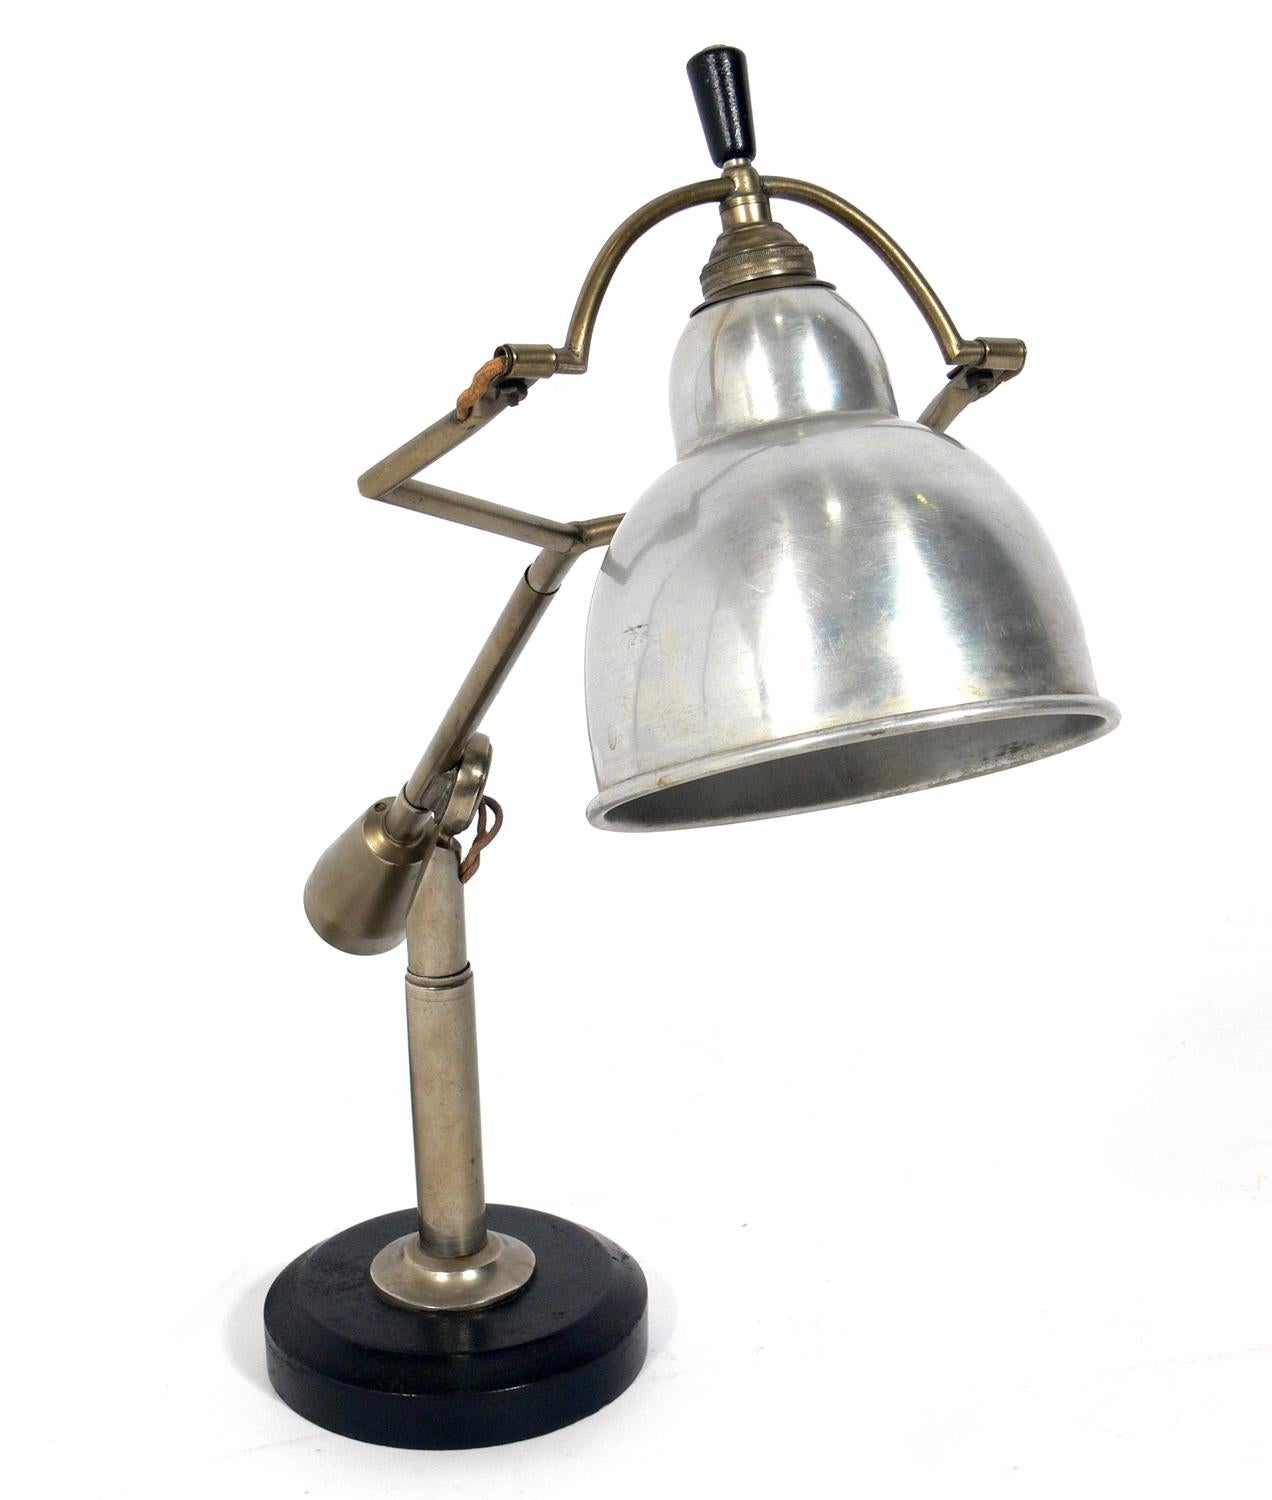 Original cantilevered Art Deco lamp, designed by Edouard-Wilfred Buquet, France, circa 1925. Signed with applied metal manufacturer's label to underside: [Buquet BTE S.G.D.G]. Currently wired for European outlets, tested and functions properly. Can